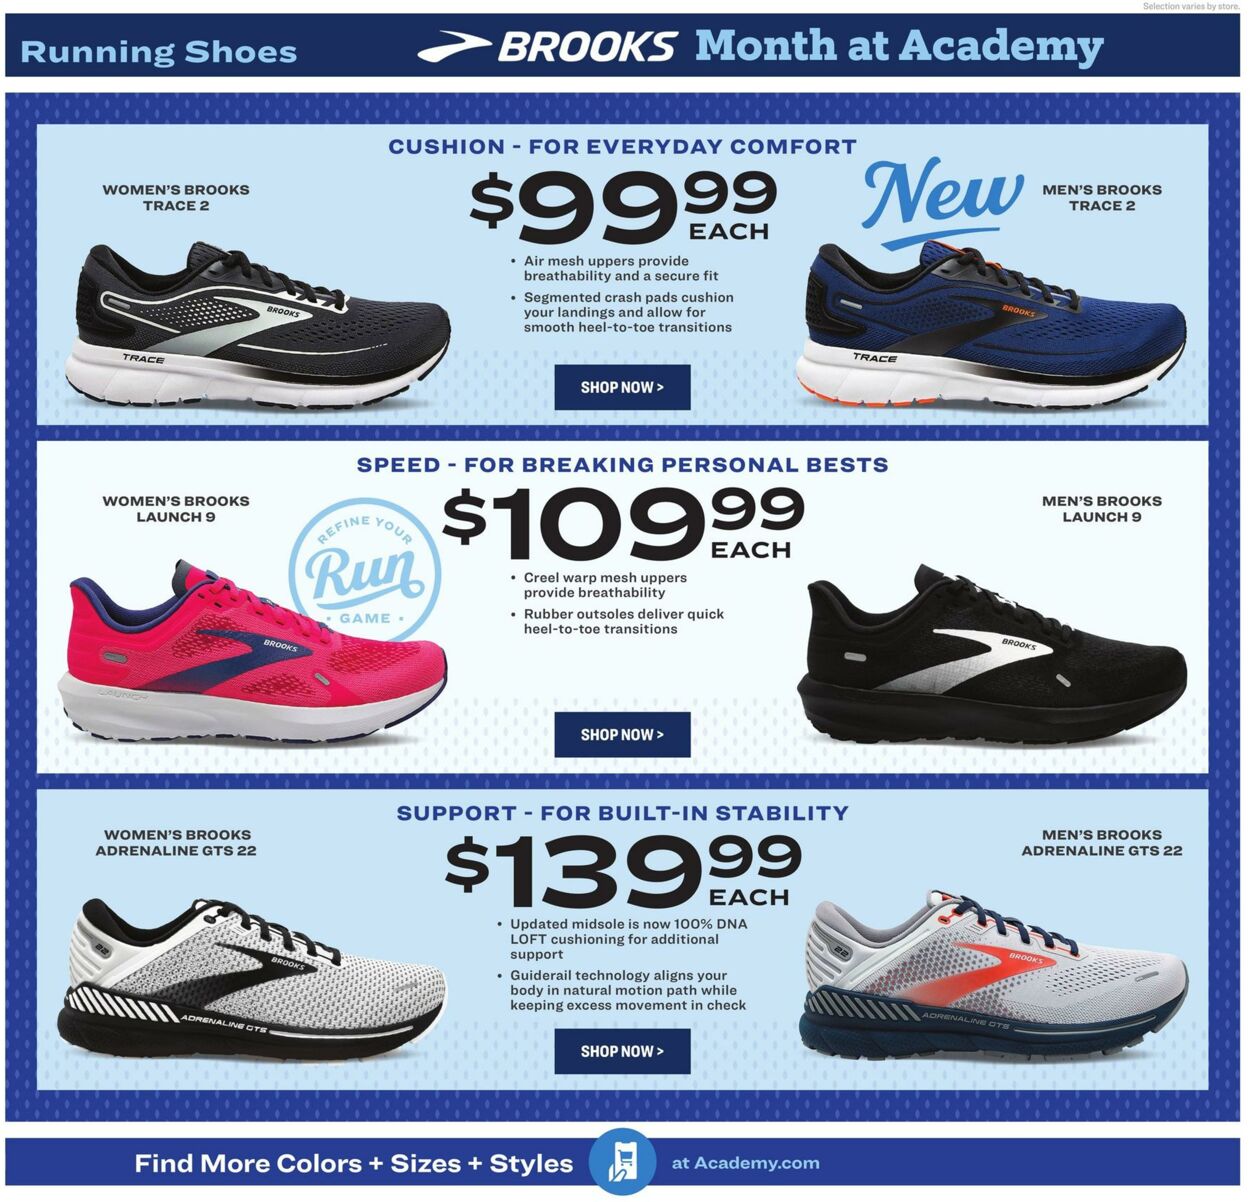 Weekly ad Academy Sports 10/03/2022 - 10/23/2022